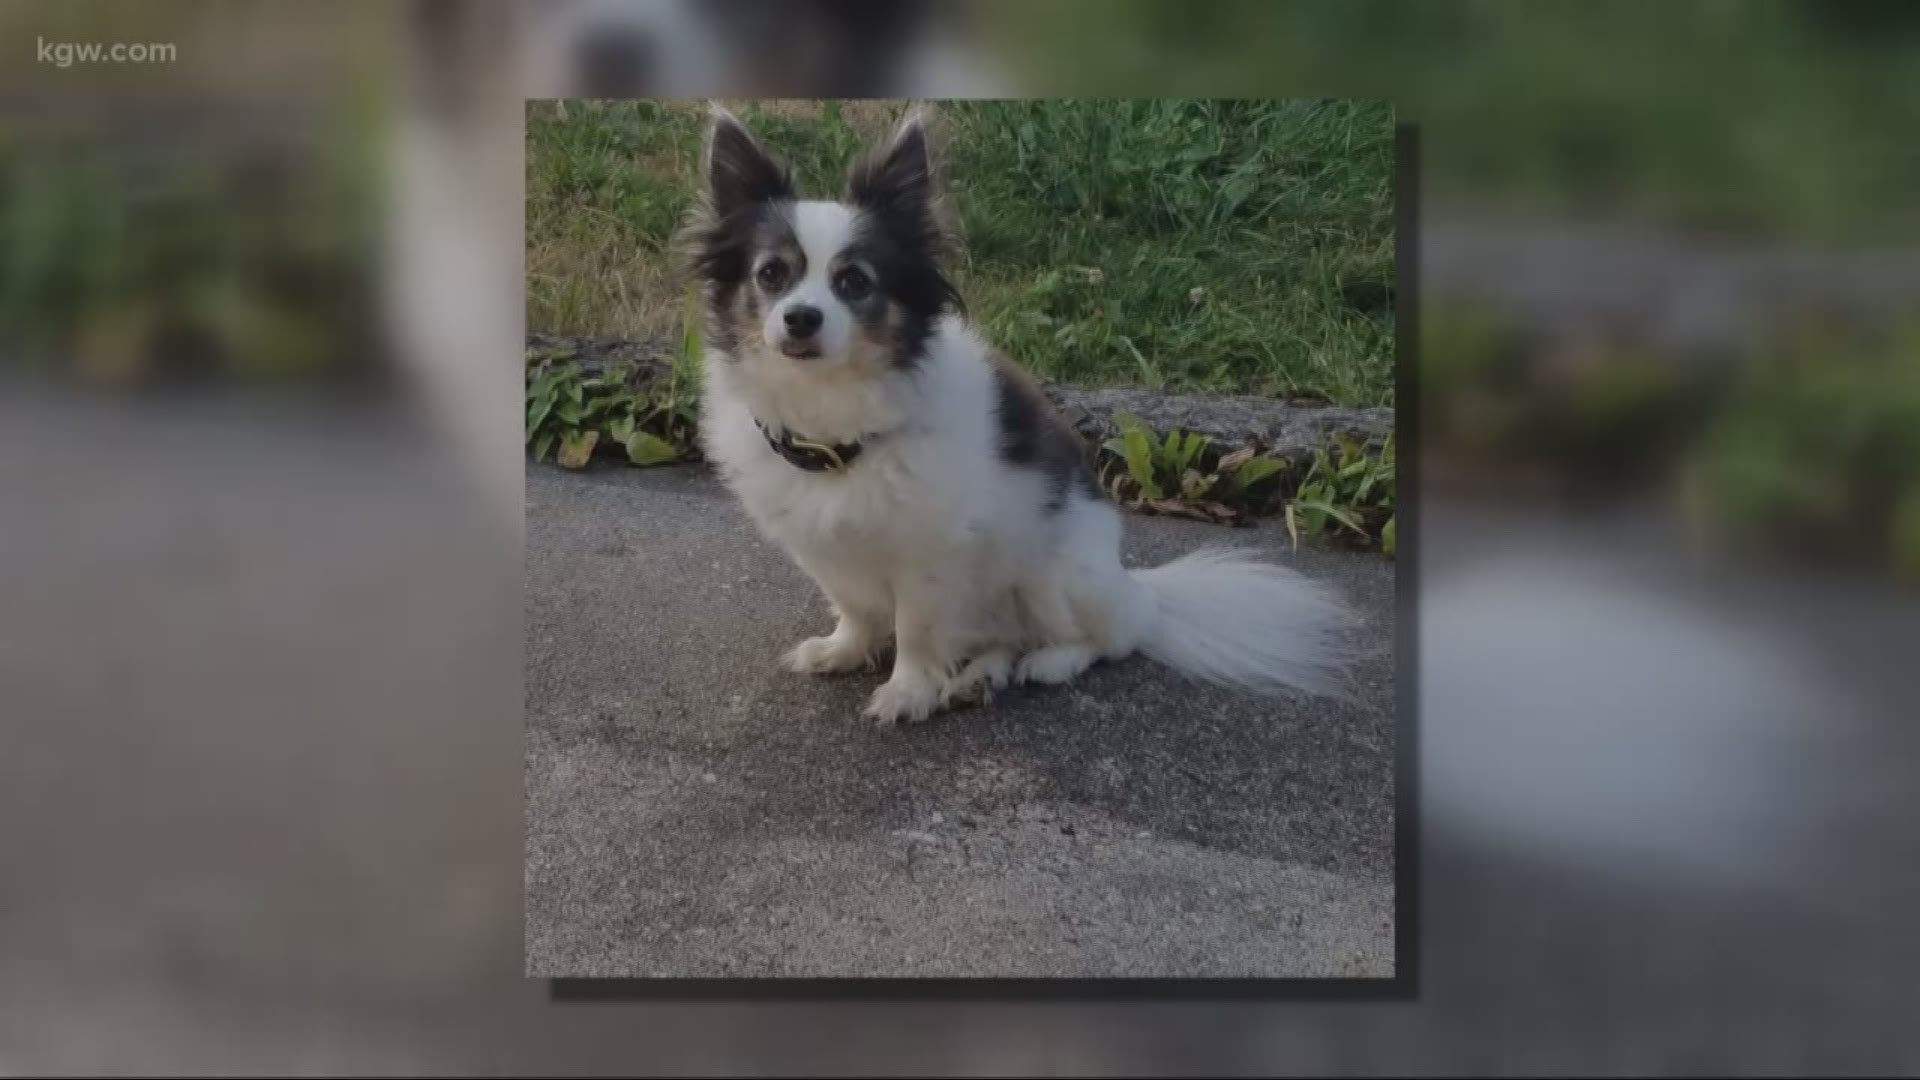 Police are looking for information after a family dog in Astoria was intentionally killed.